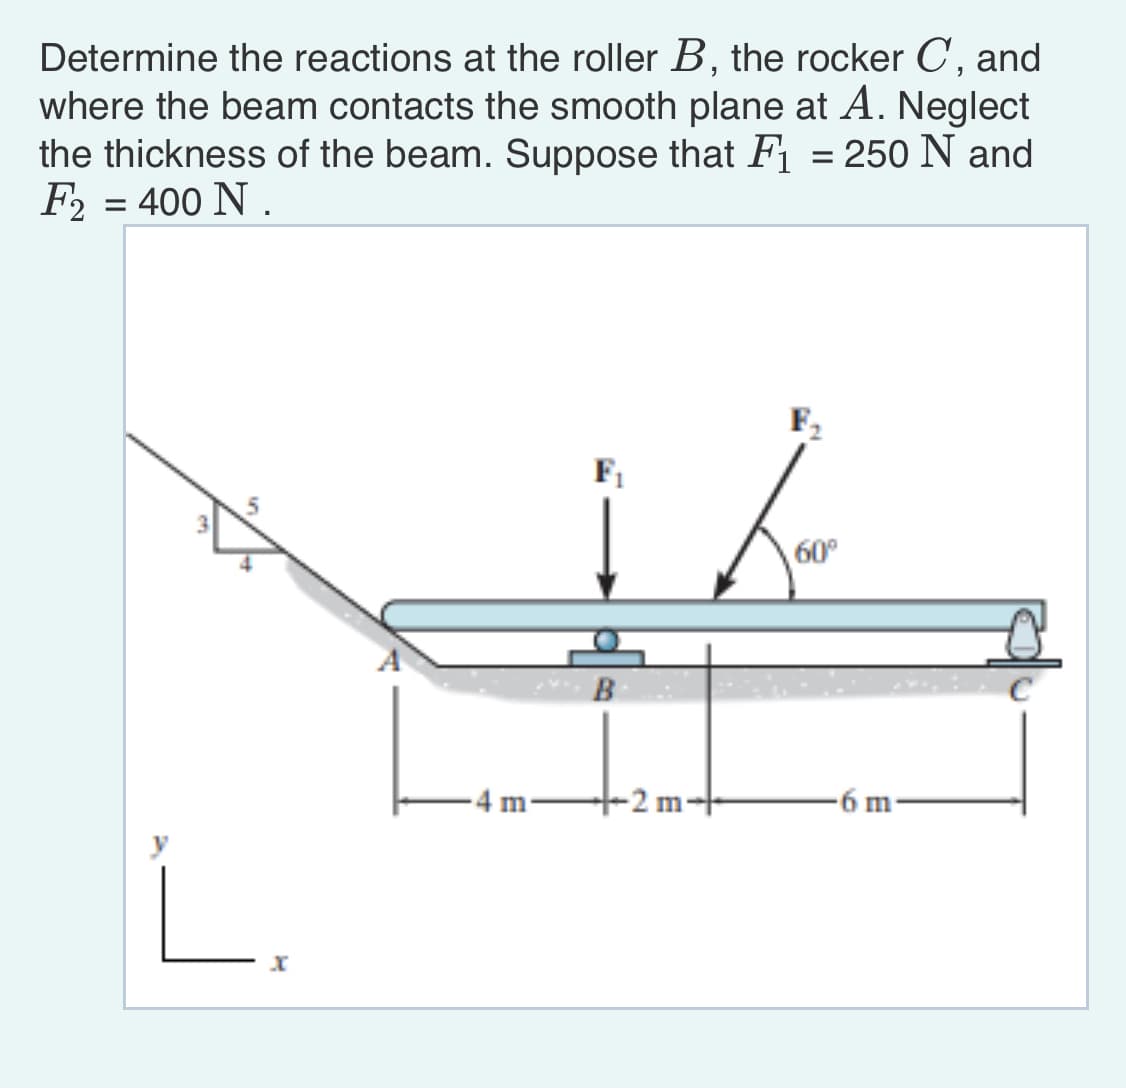 Determine the reactions at the roller B, the rocker C, and
where the beam contacts the smooth plane at A. Neglect
the thickness of the beam. Suppose that F₁ = 250 N and
F2 = 400 N.
5
L.
-4 m.
B
-2 m-
F₂
60°
-6 m-